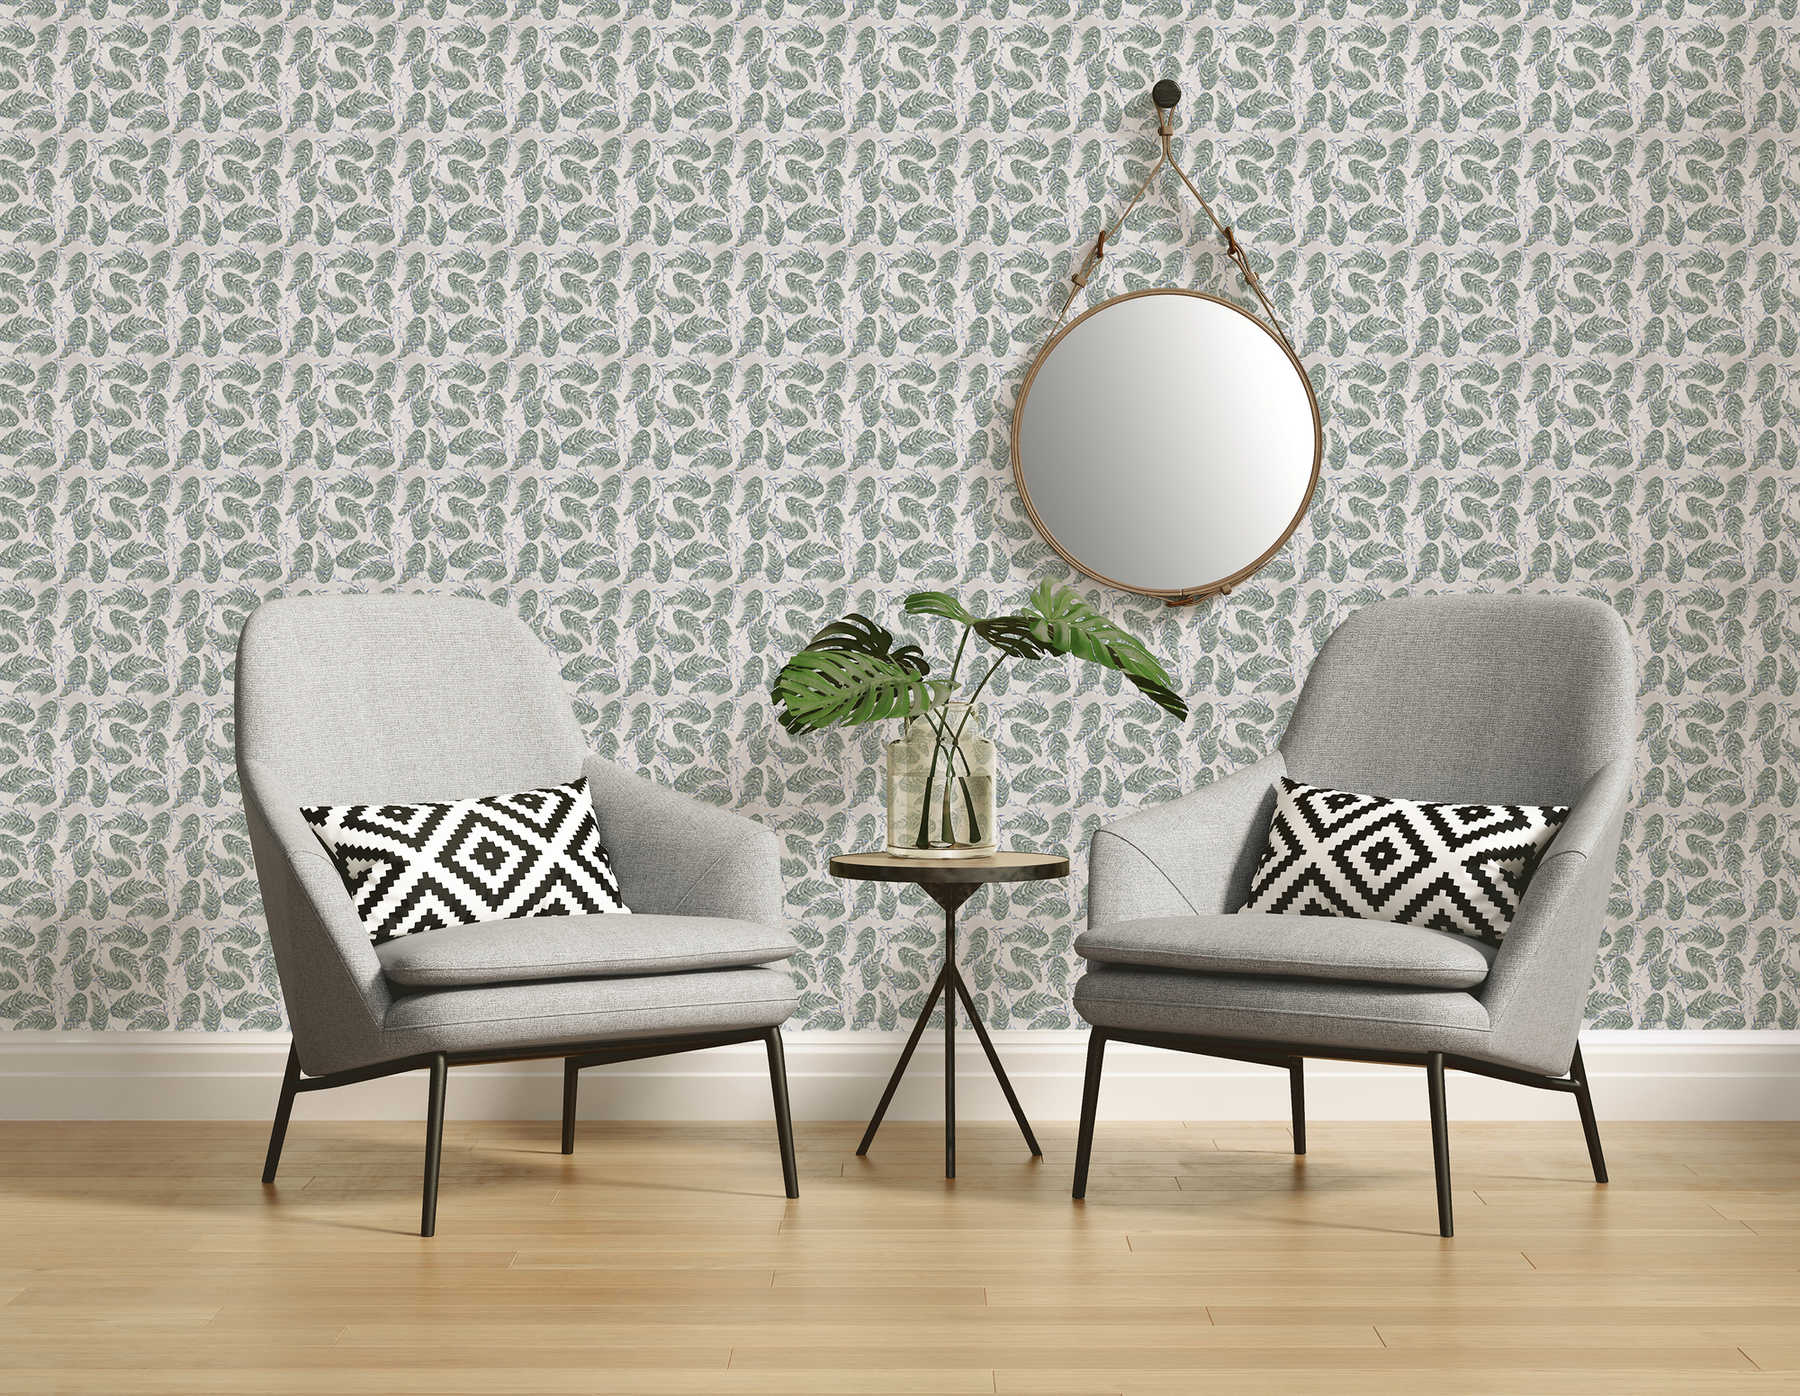             Design wall mural with floral pattern in grey and green on matte smooth non-woven
        